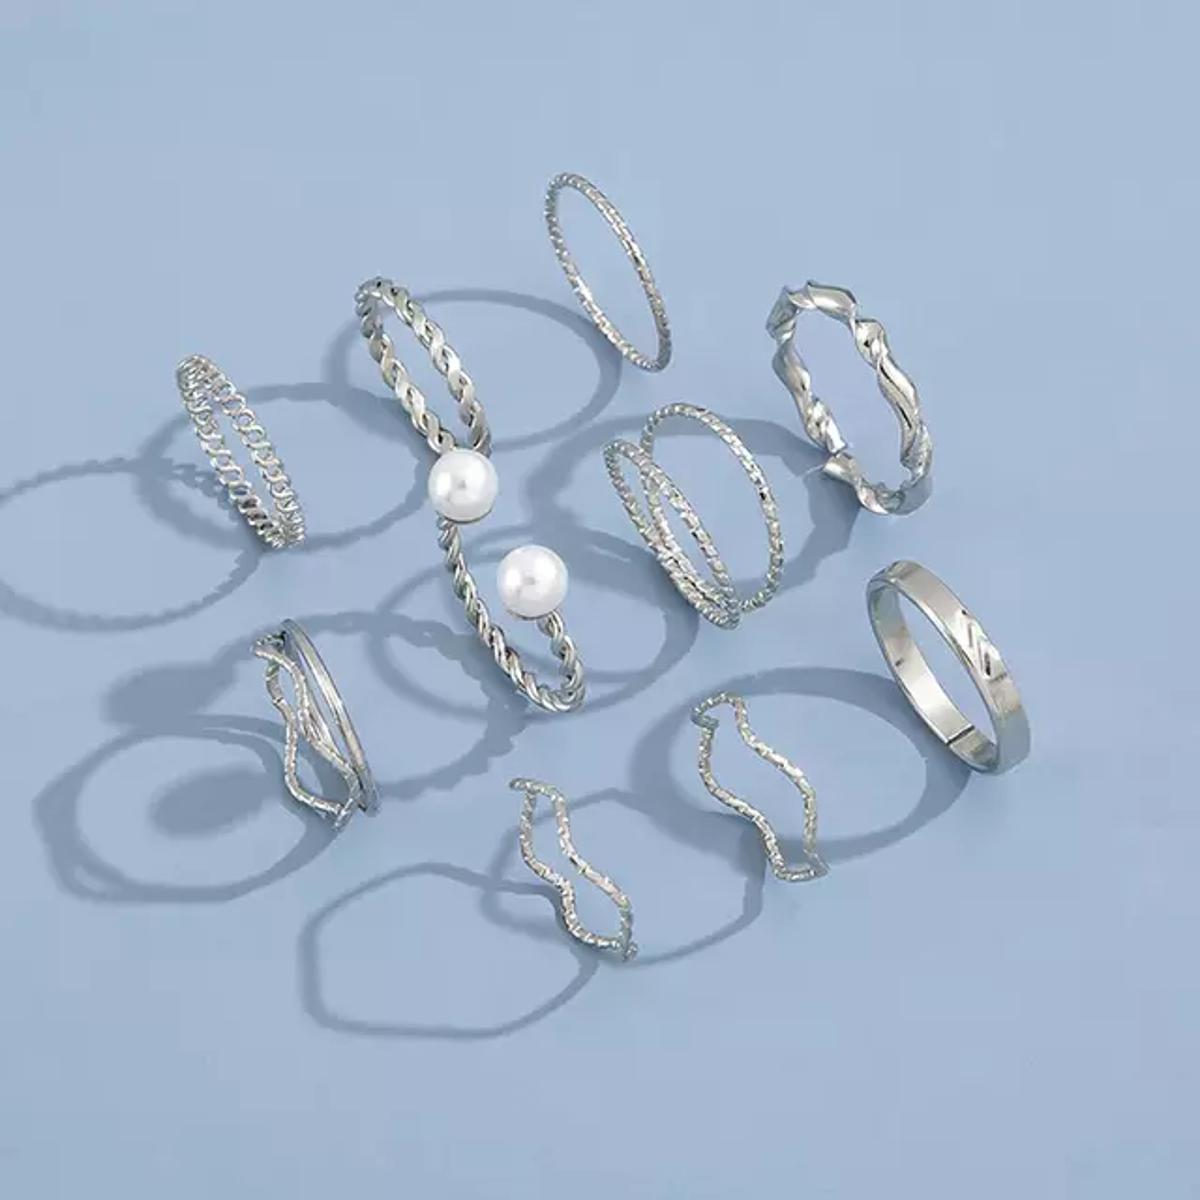 Pack of 10 Golden Silver Stackable set of Rings